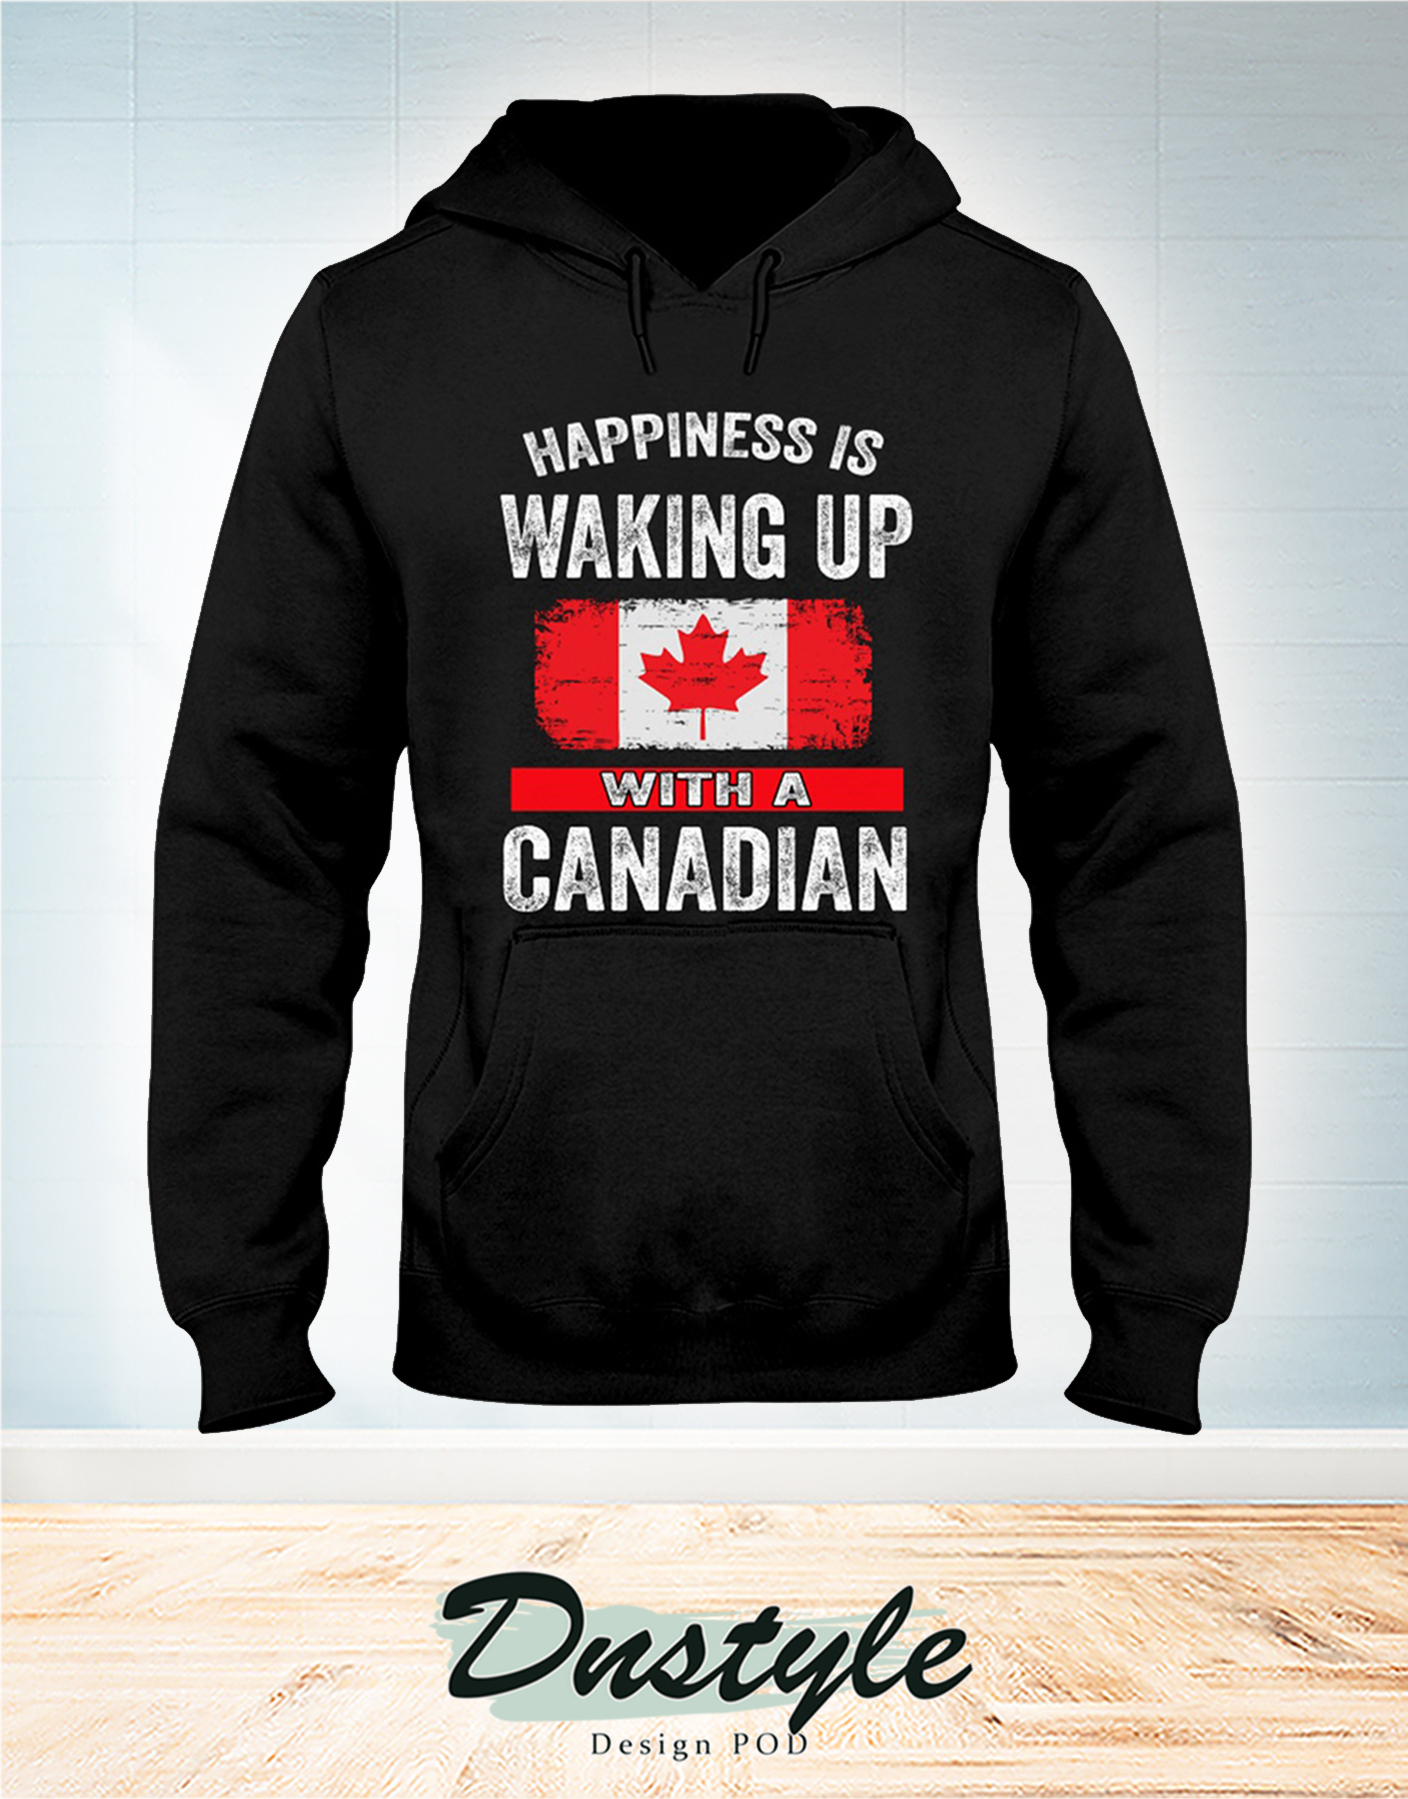 Happiness is waking up with a Canadian hoodie